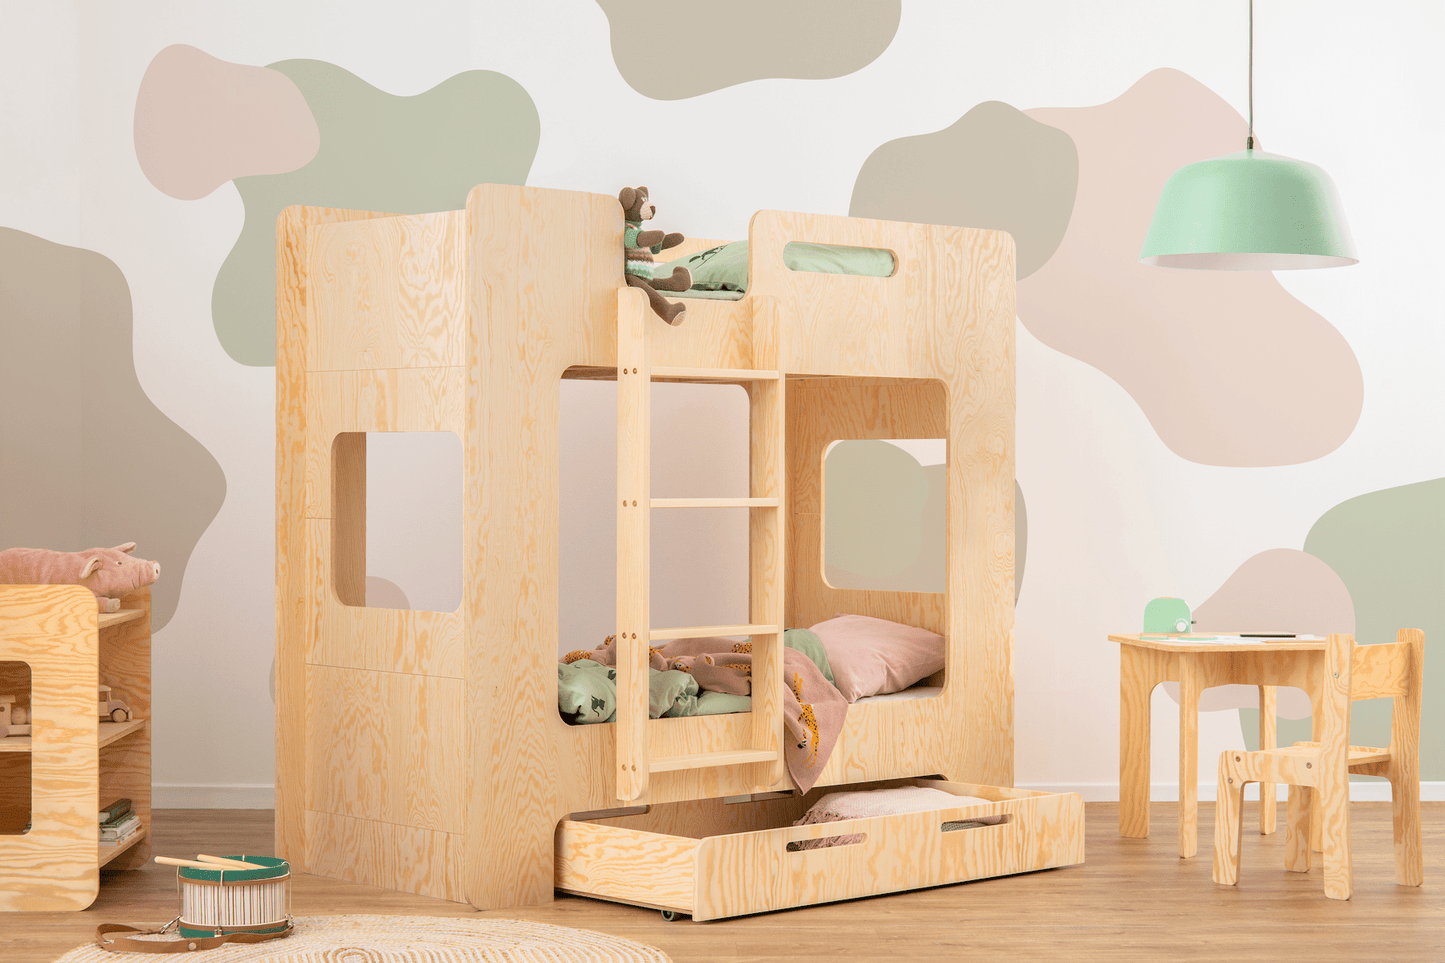 Cube bunk bed with drawer